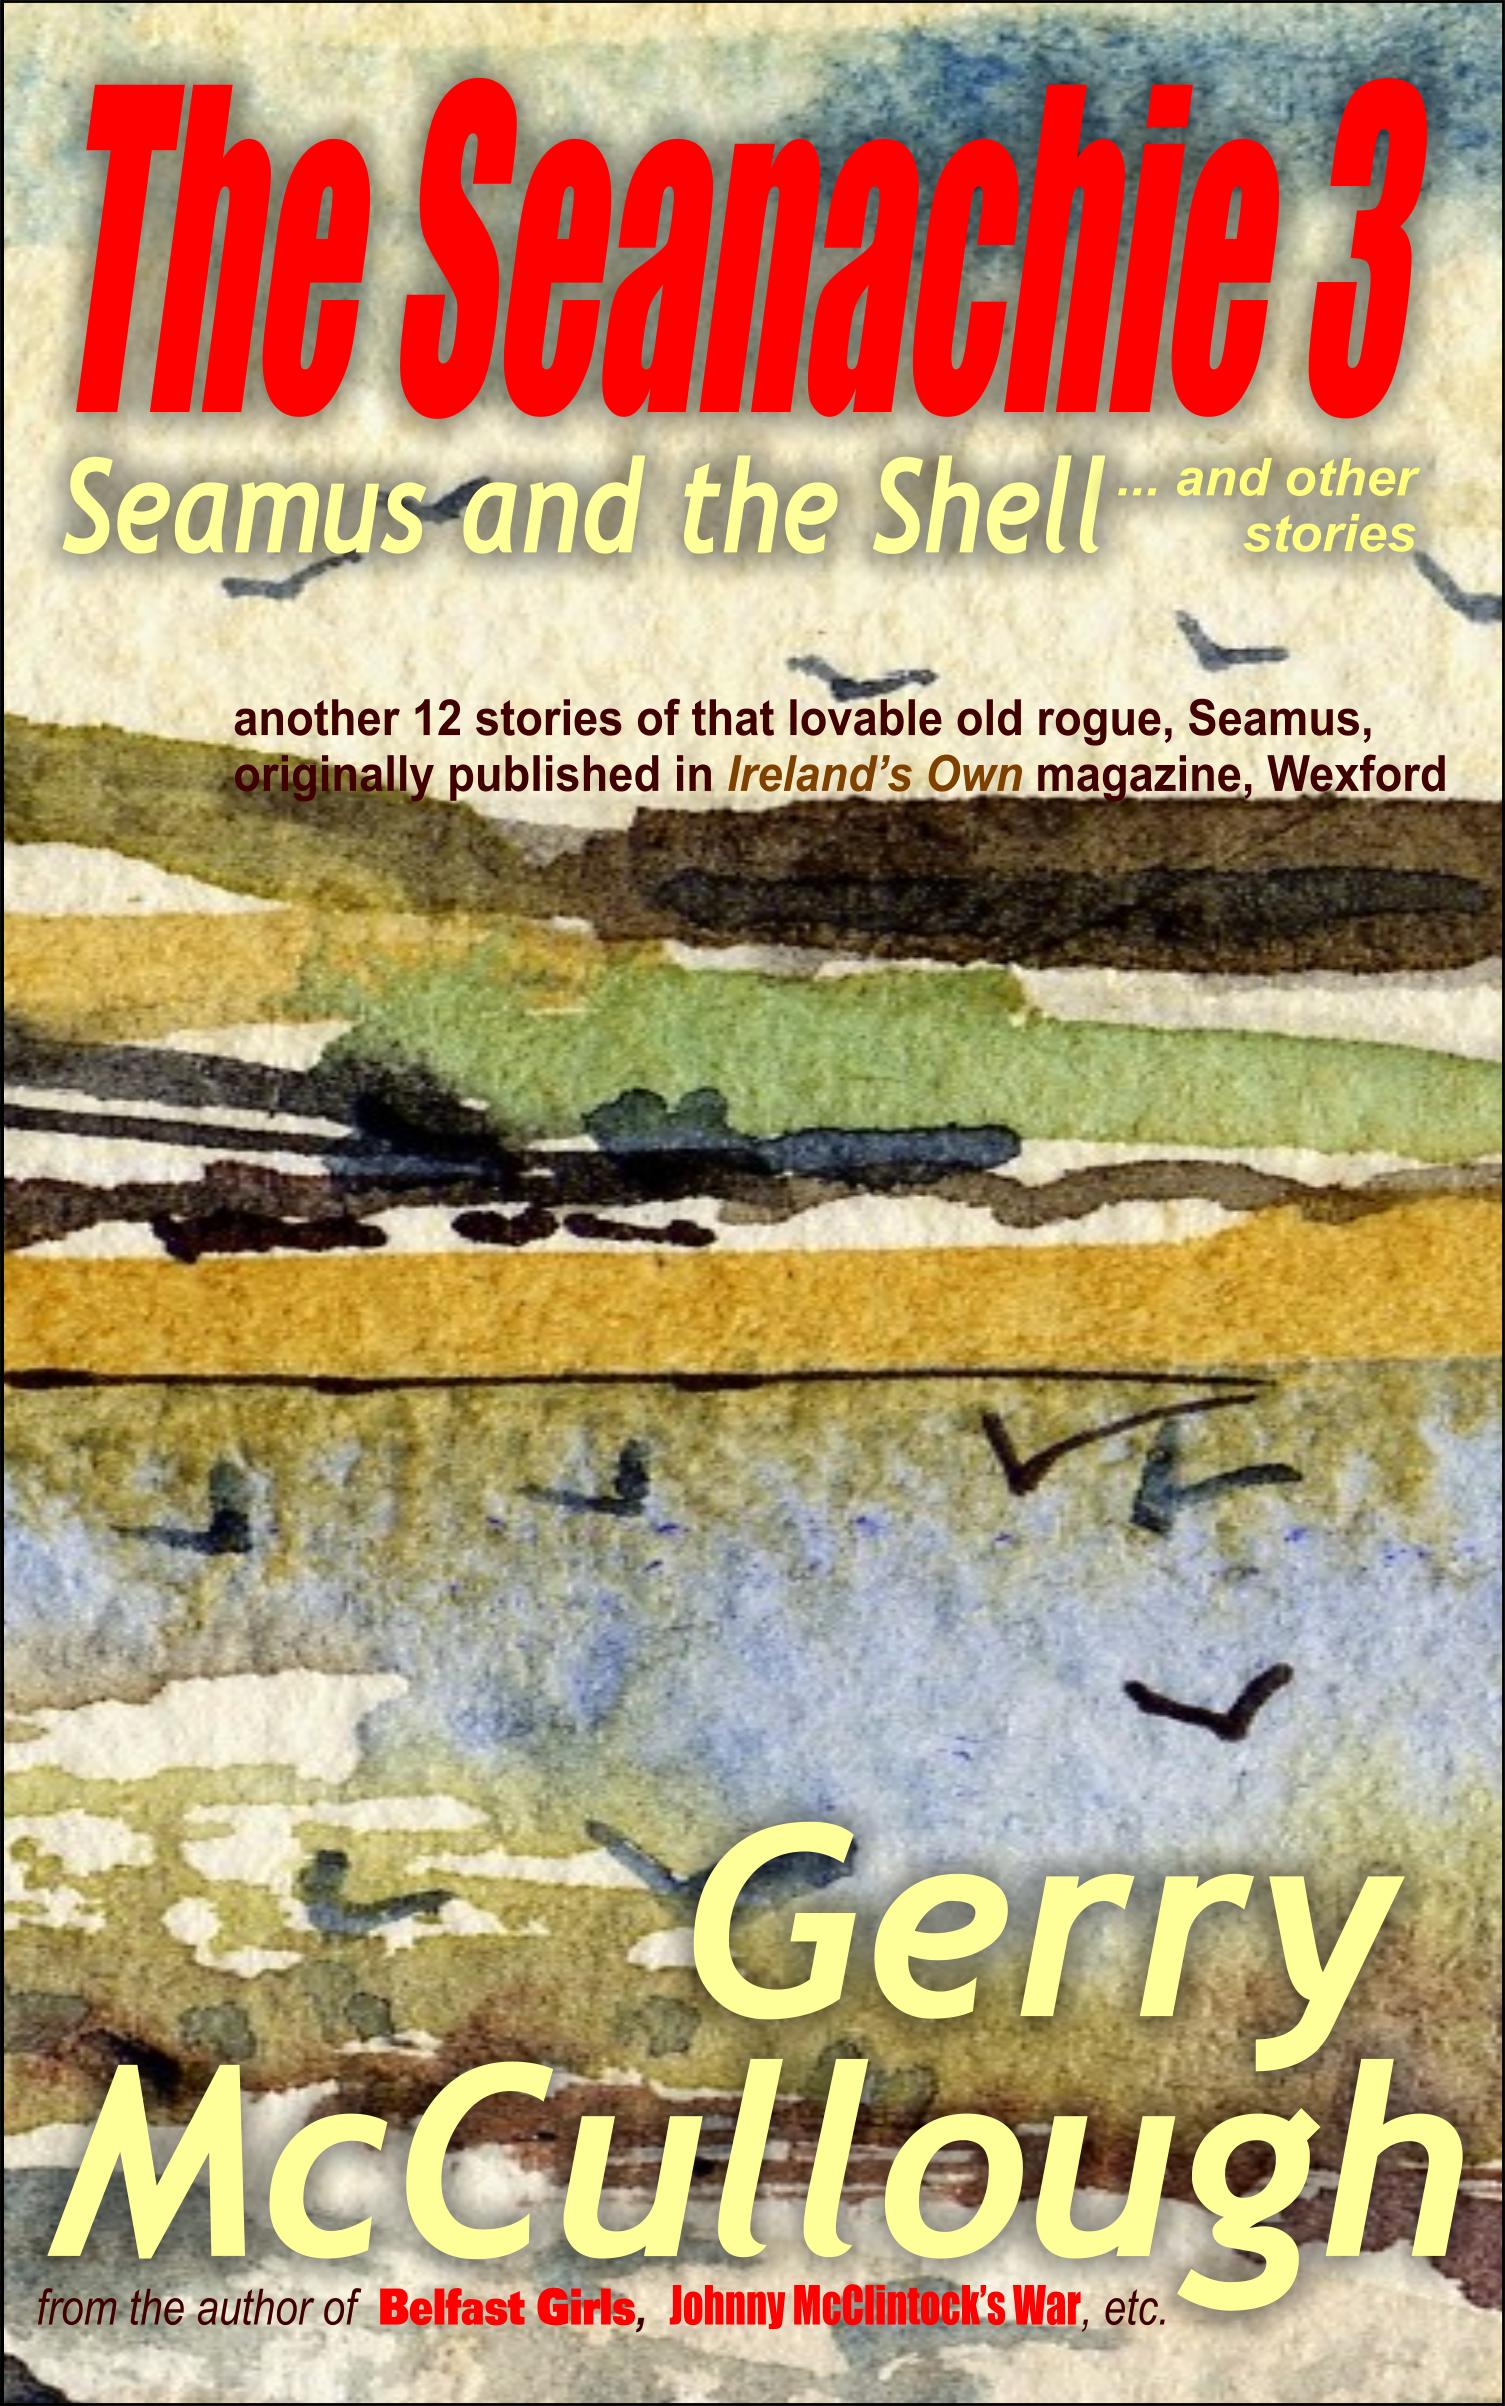 Buy 'The Seanachie 3: Seamus and the Shell and other stories' from Amazon & other outlets